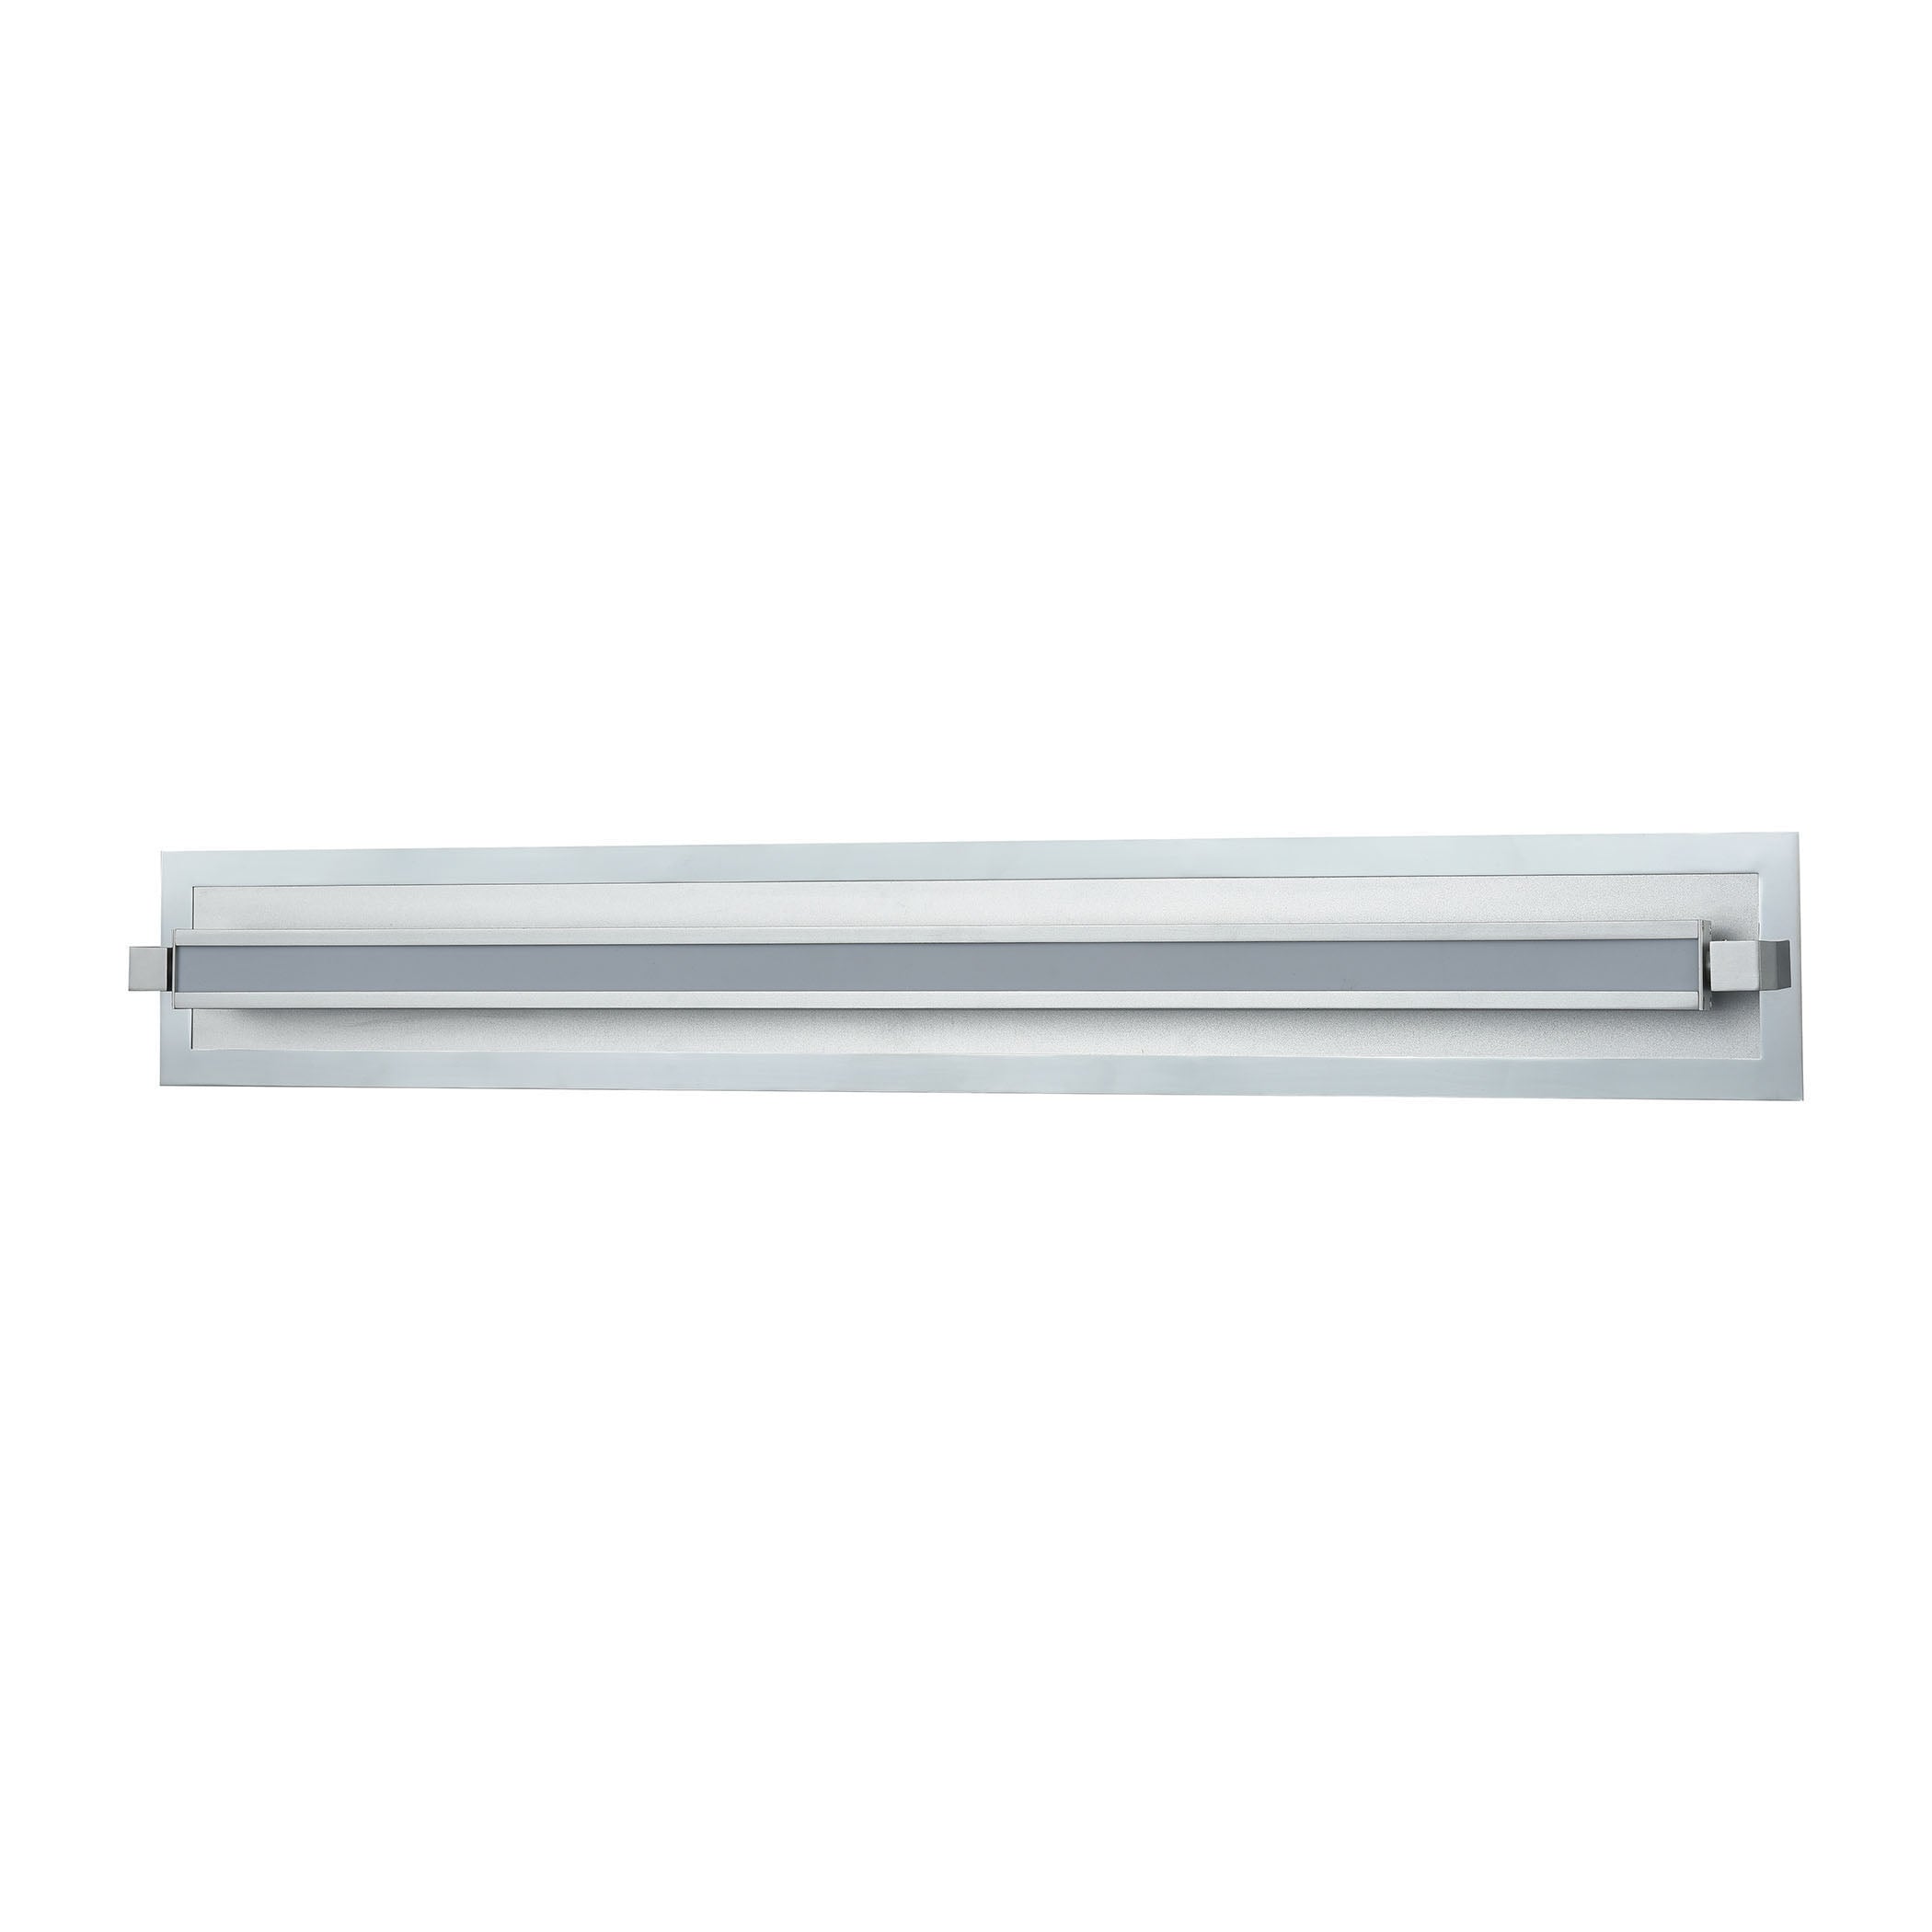 ELK Lighting 85122/LED Kiara 1-Light Vanity Sconce in Frosted and Polished Nickel and Satin Aluminum - Integrated LED